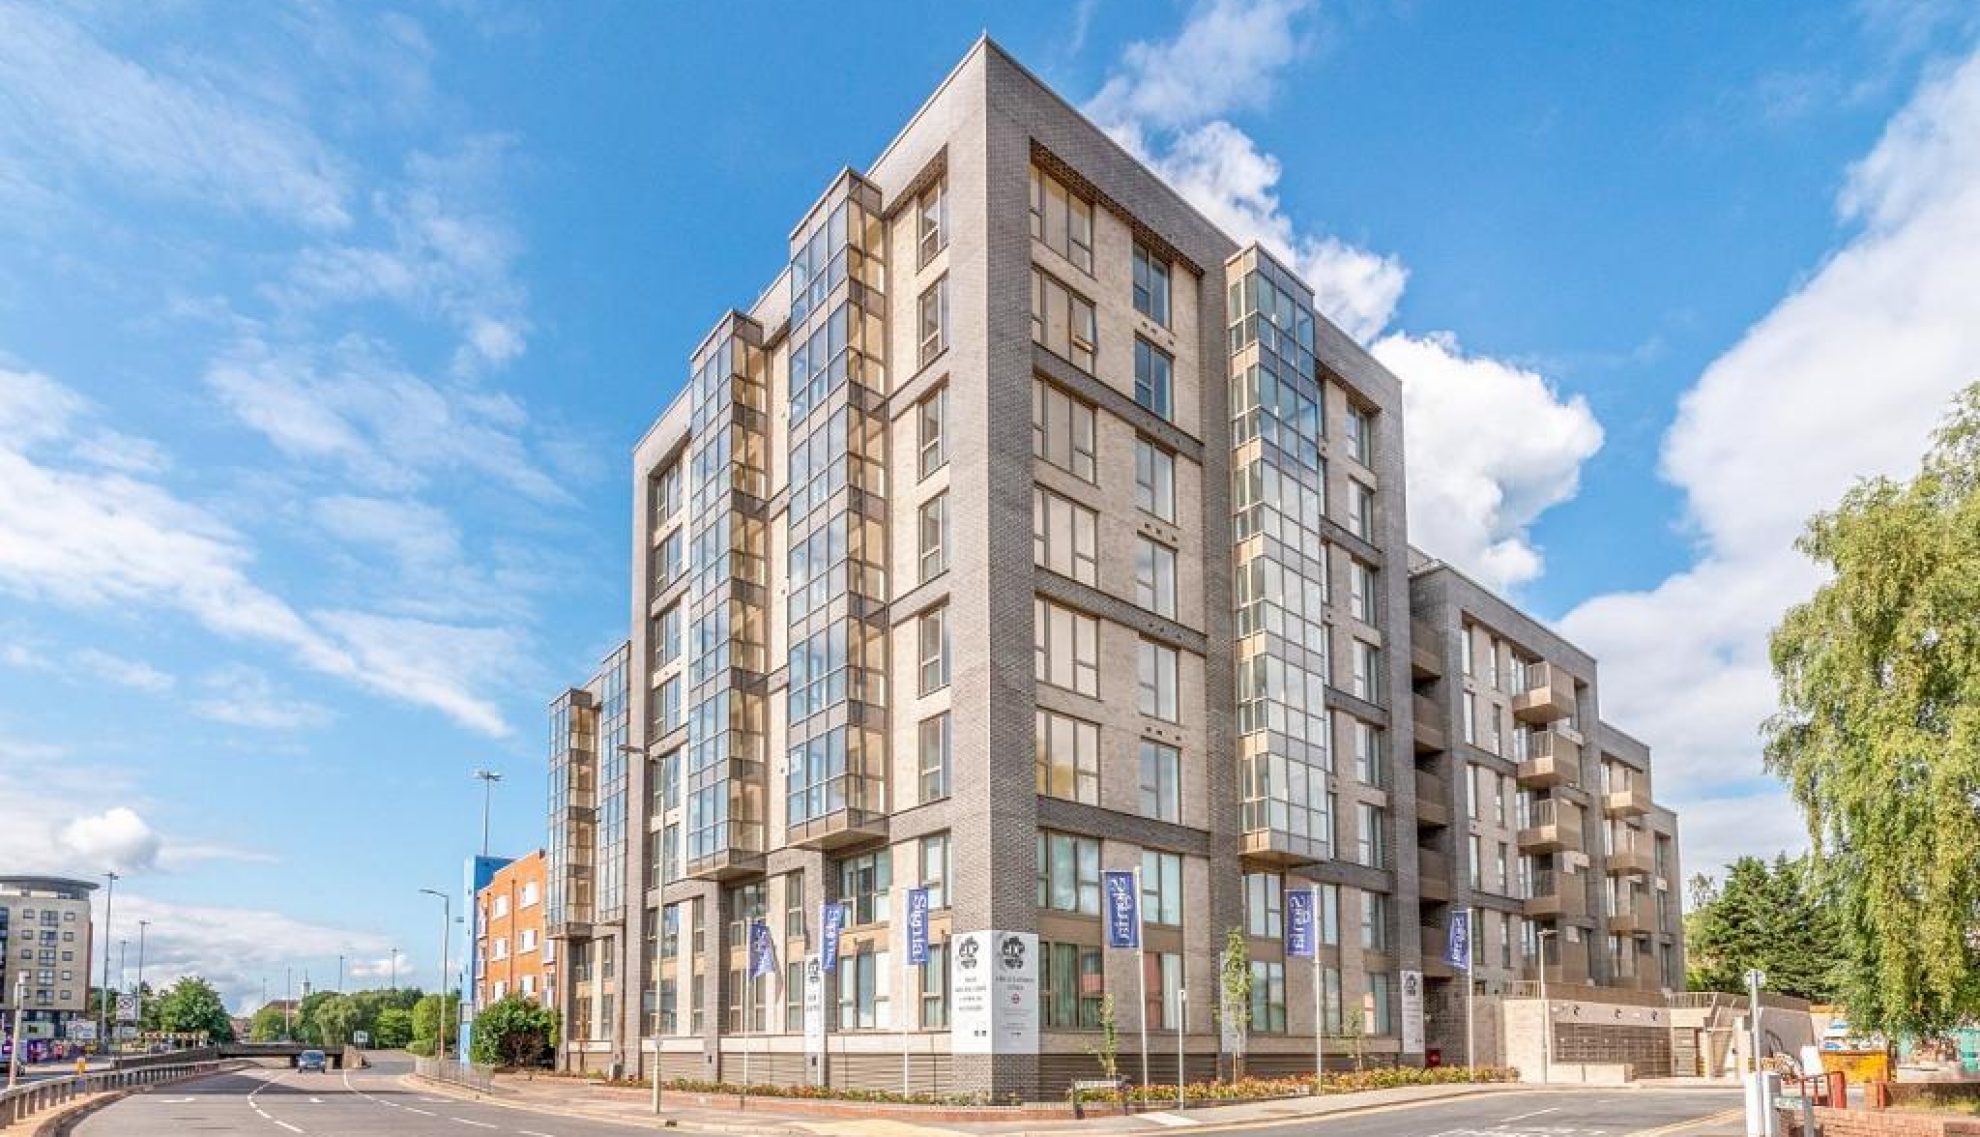 Orchard Court street view – new build flats for sale in Watford